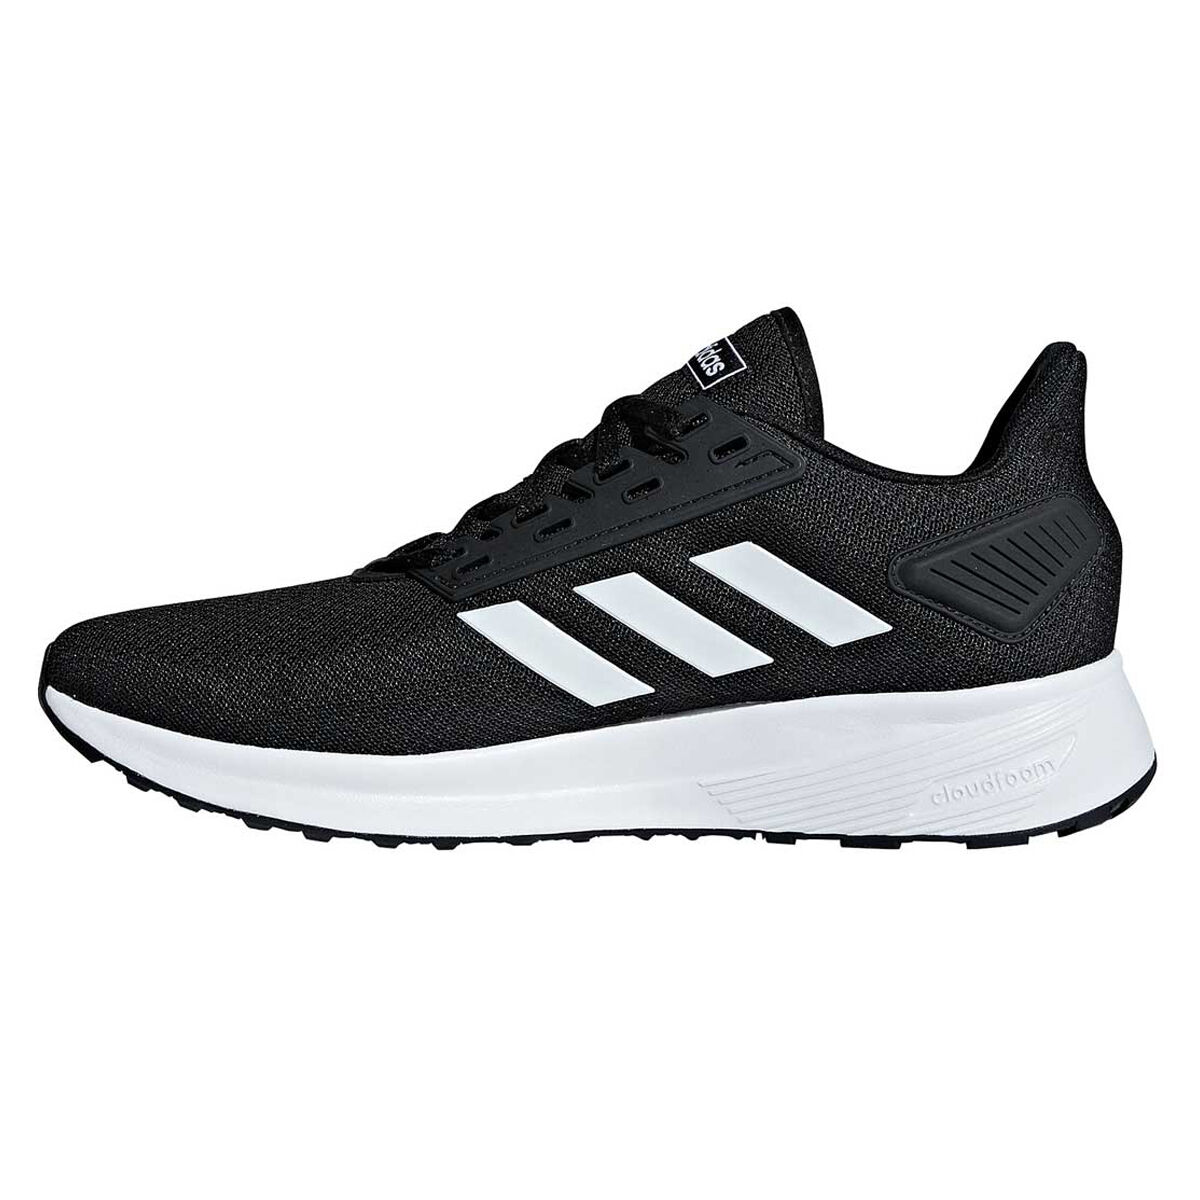 adidas sport shoes